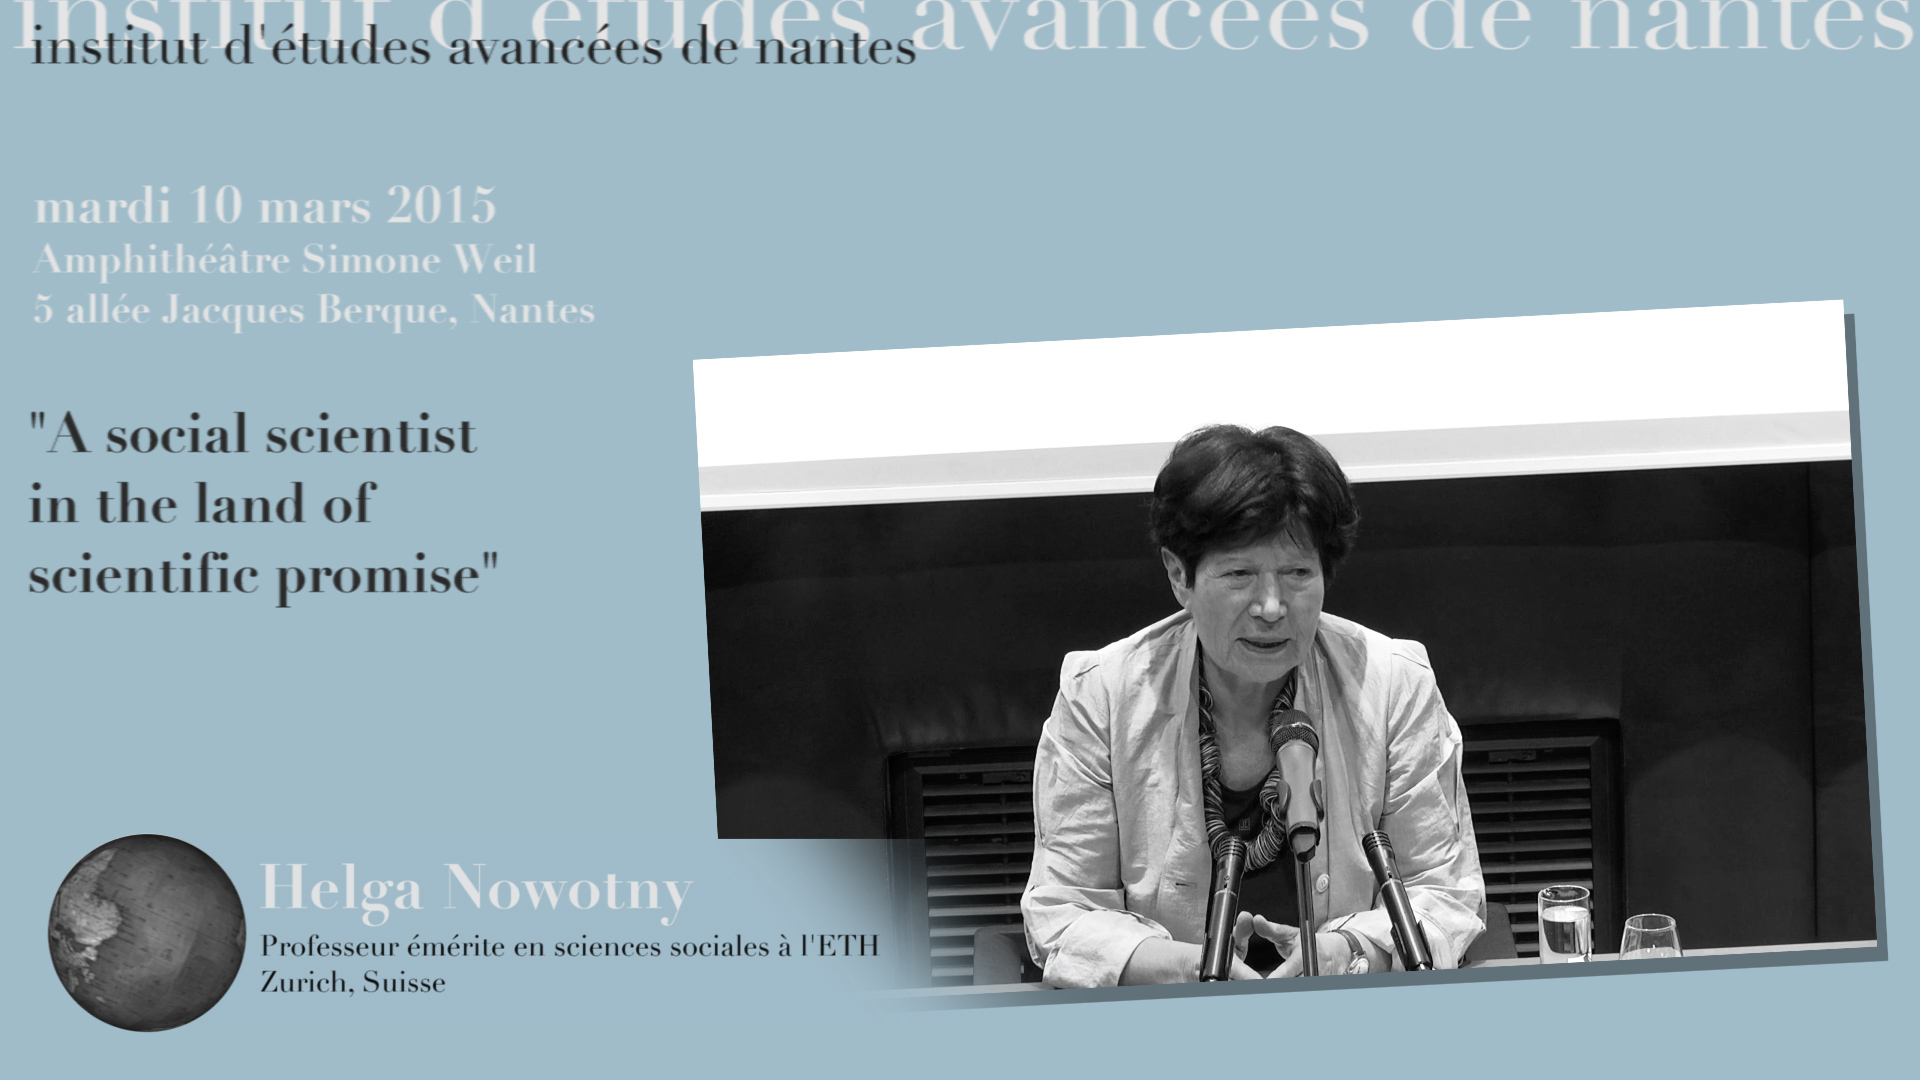 Conférence de Helga Nowotny : "A social scientist in the land of scientific promise"